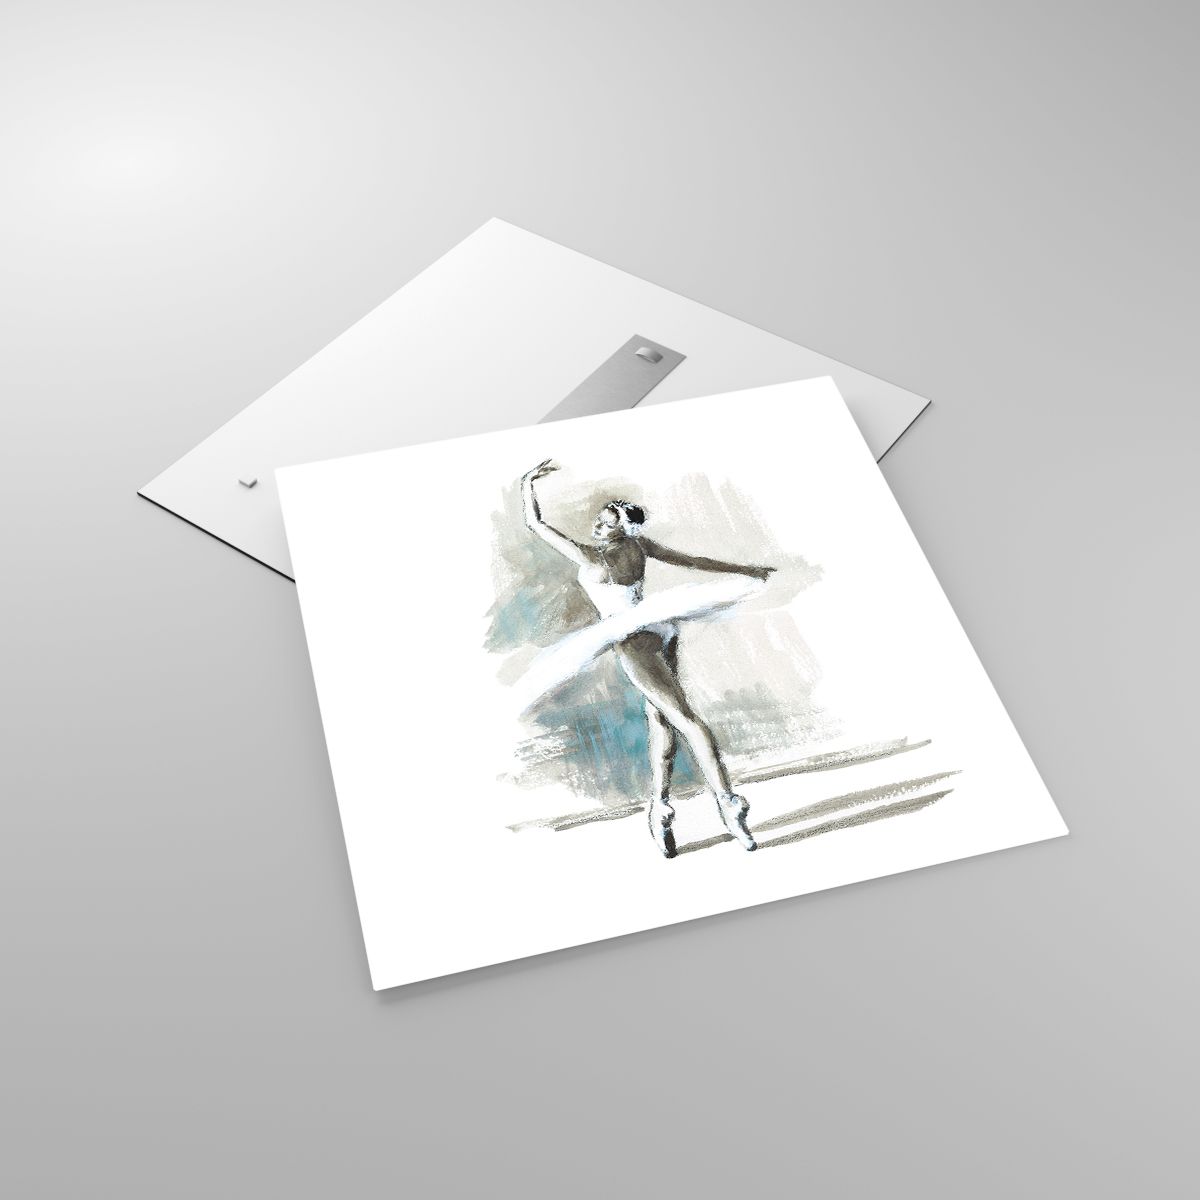 Glass picture  Ballerina, Glass picture  Dance, Glass picture  Ballet, Glass picture  Graphics, Glass picture  Painting